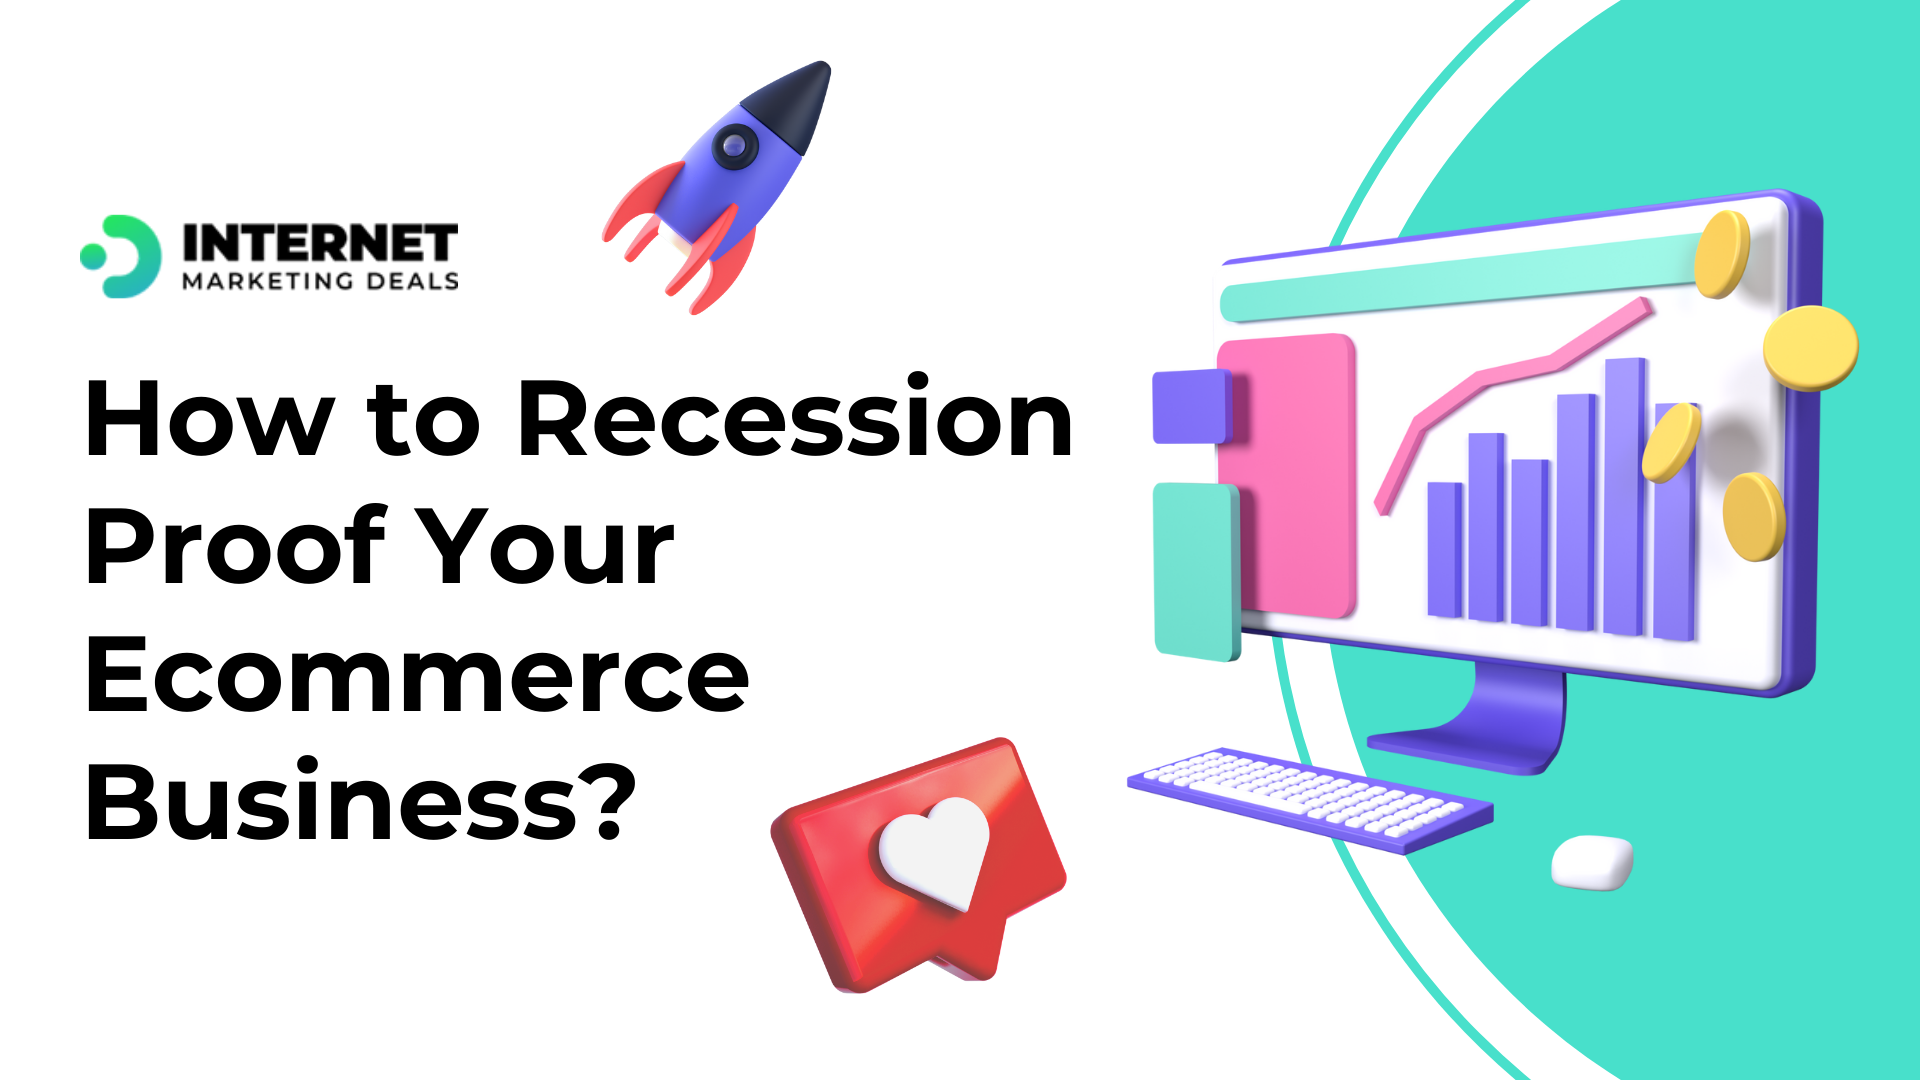 How to Recession Proof Your Ecommerce Business?